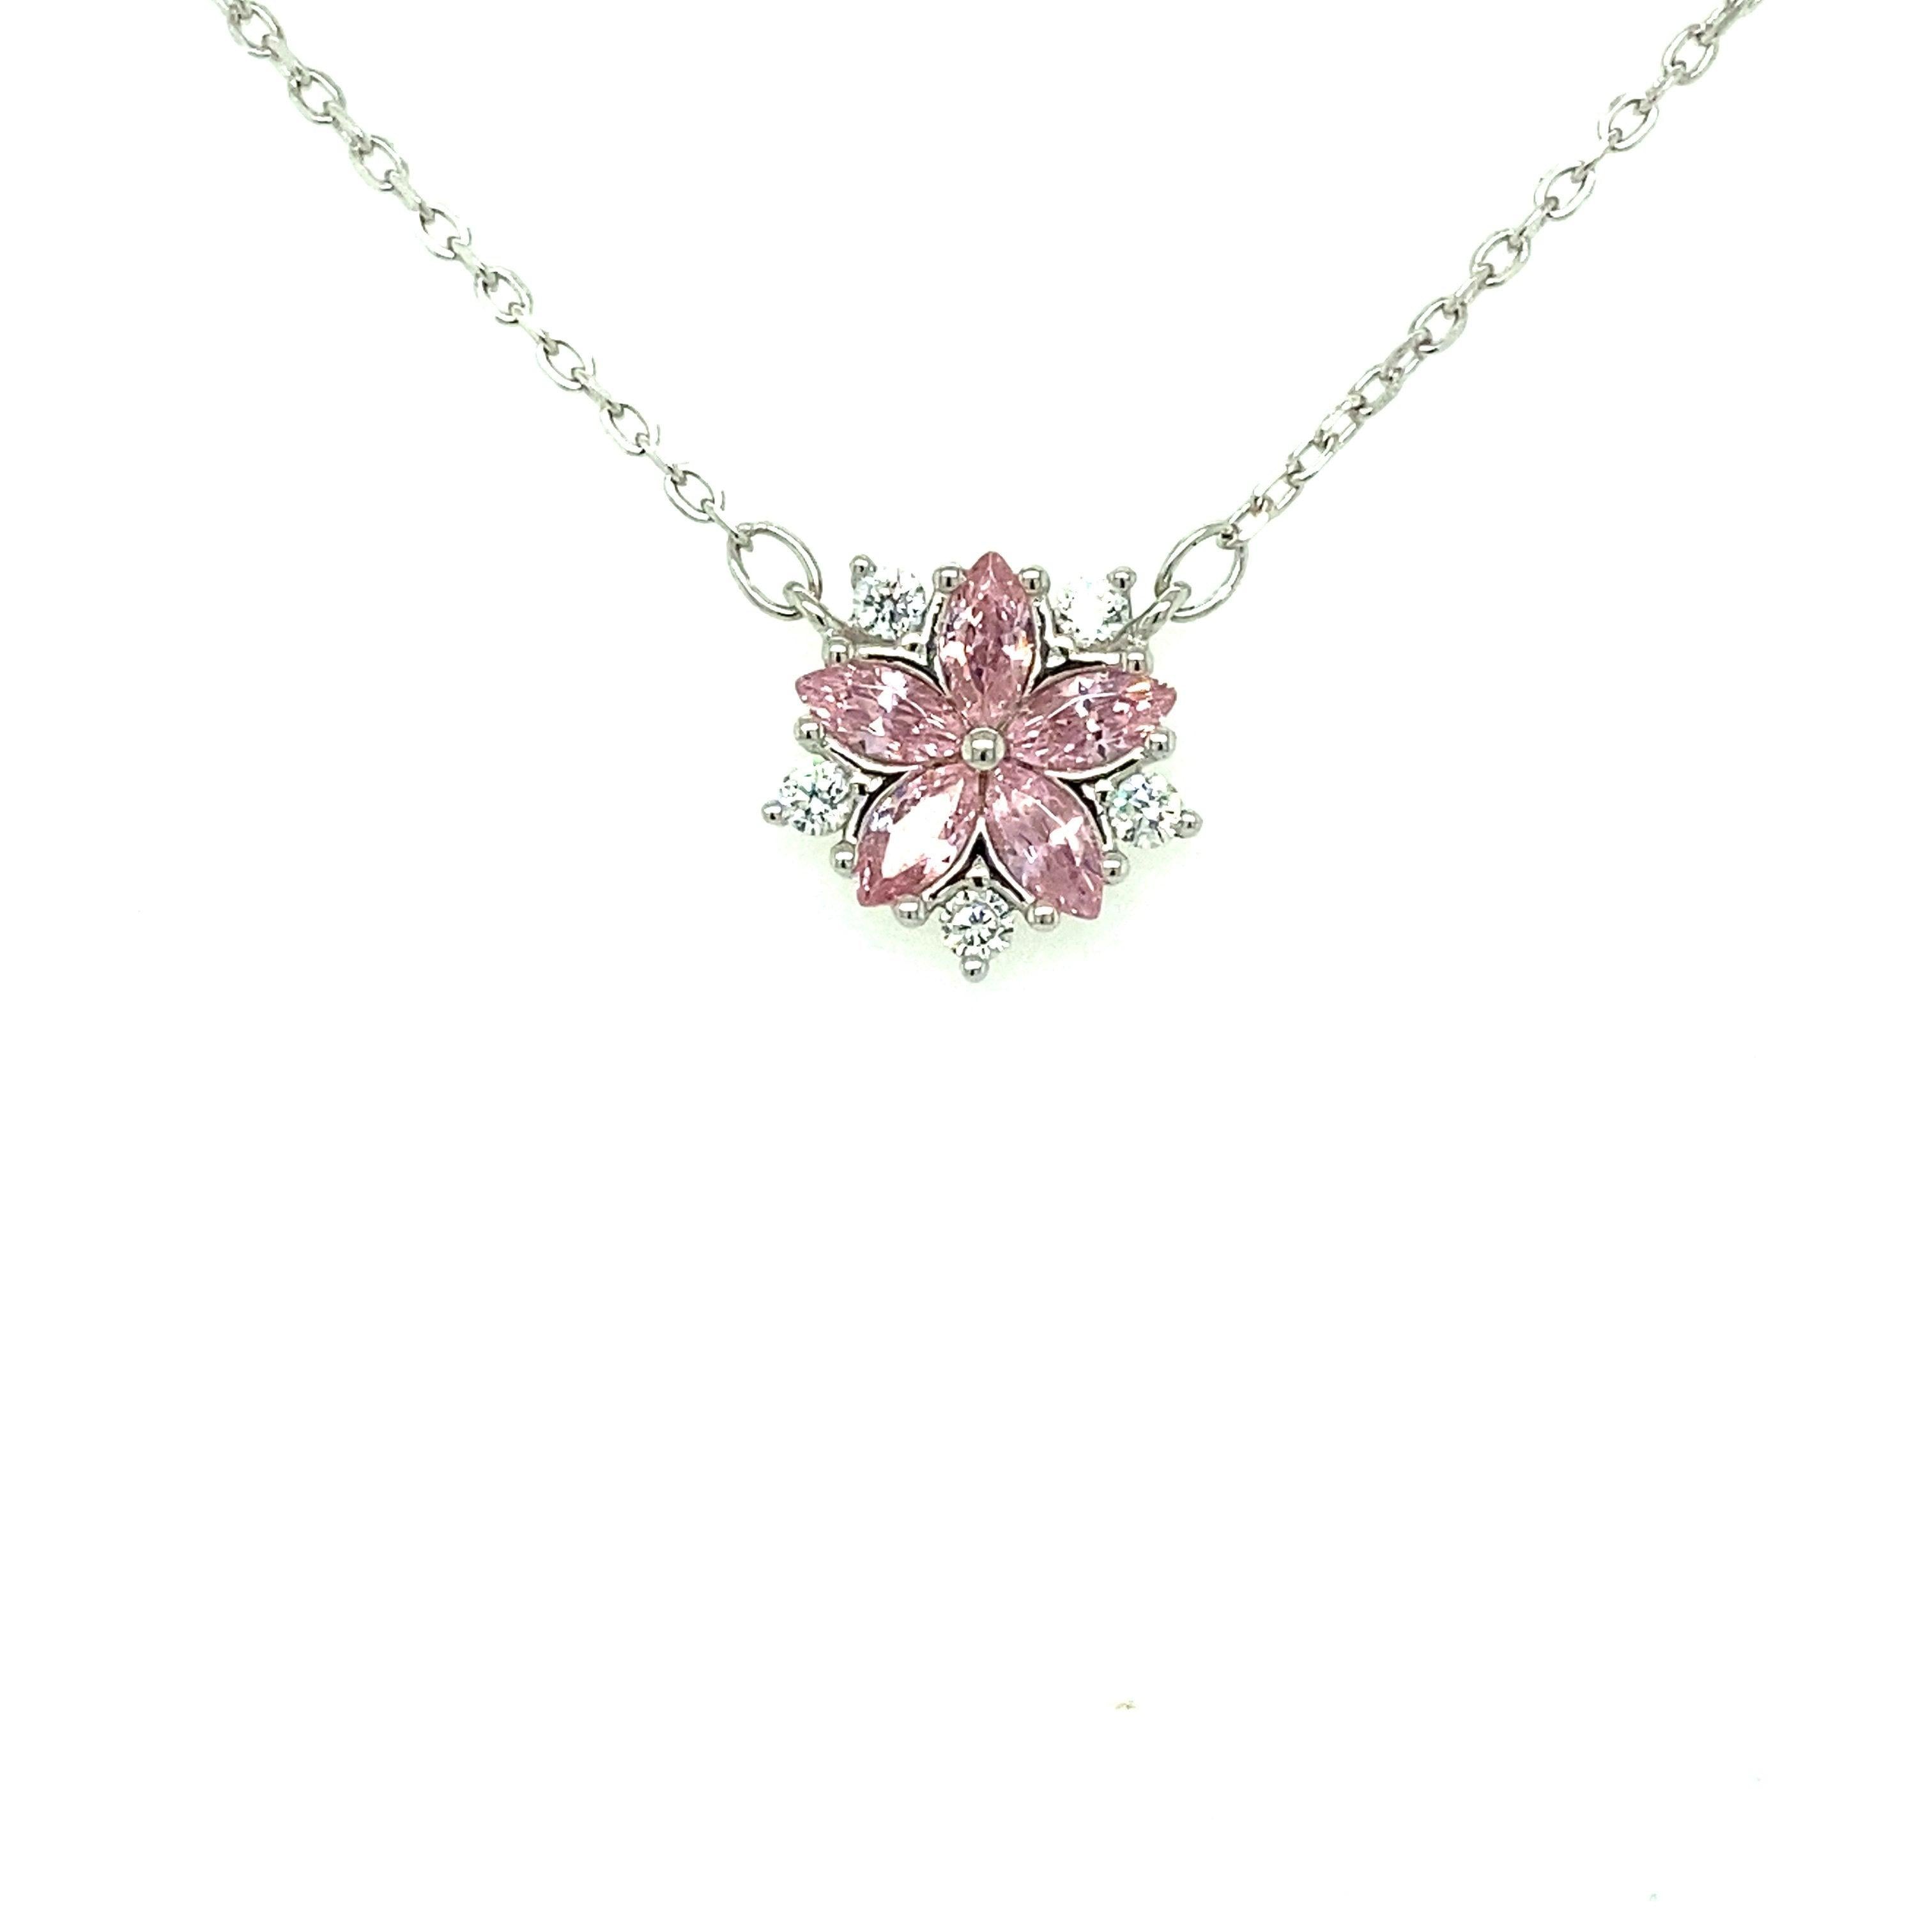 Necklace n1506-s - 925 Sterling Silver - Asfour Crystal